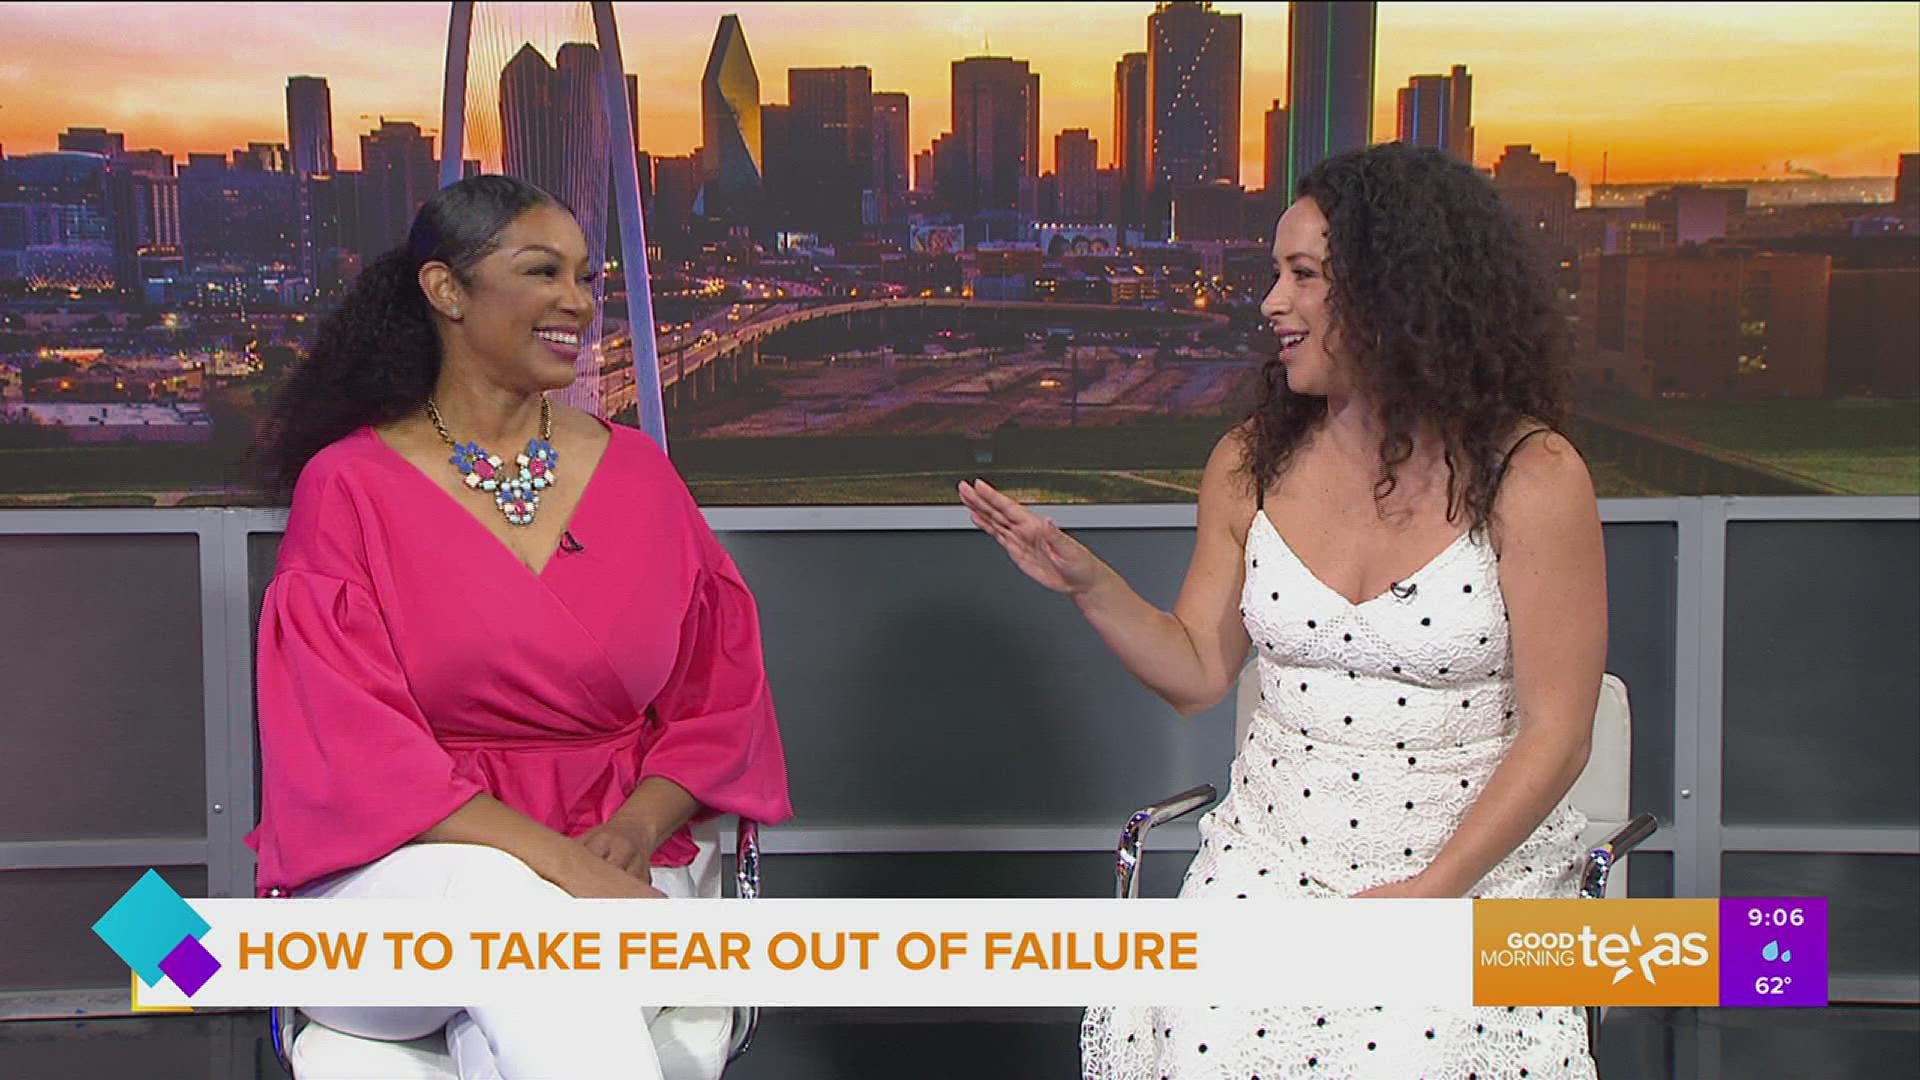 Dr. Jada Jackson gives tips on how to embrace and take the fear out of failure.